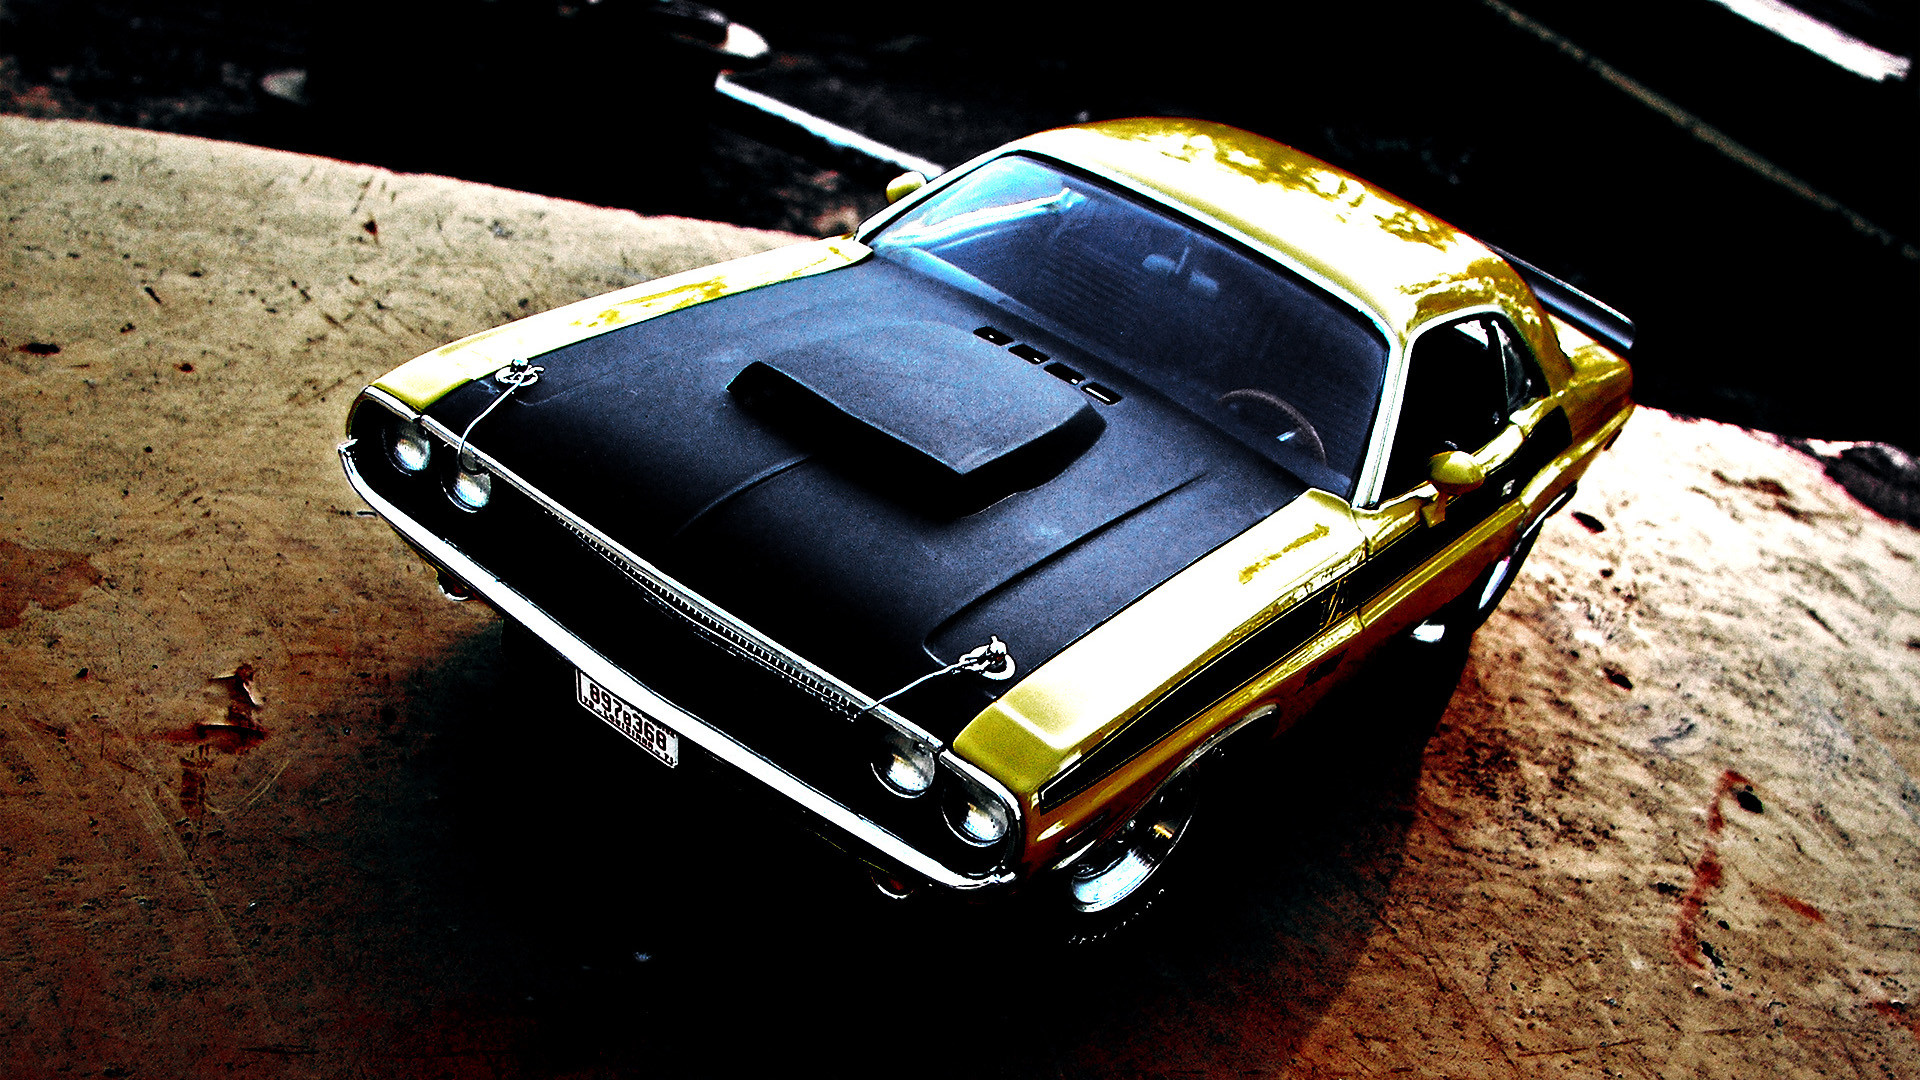 1970 Dodge Challenger muscle cars classic wallpaper 47022 WallpaperUP